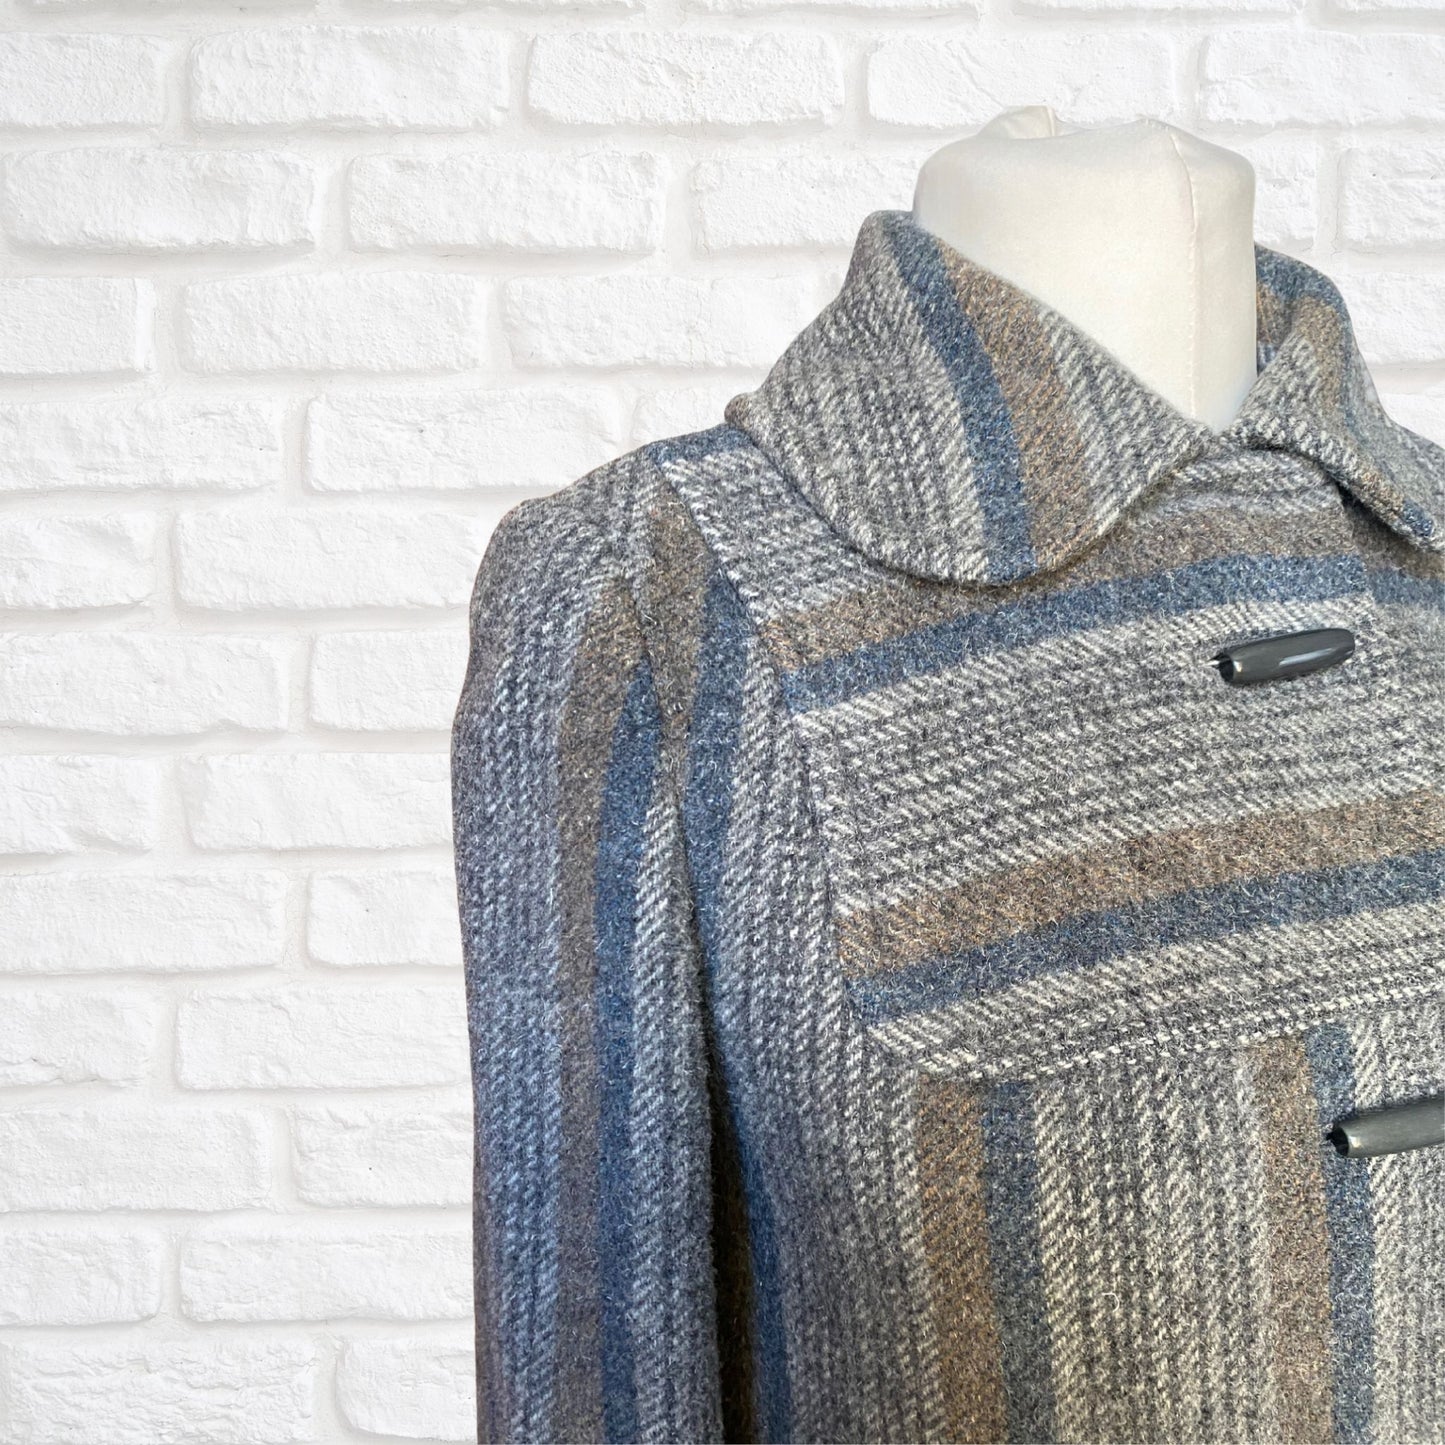 Vintage 70s Grey Blue Wool Midi Coat - Classic Style and Timeless Elegance.  Approx UK size 10-12